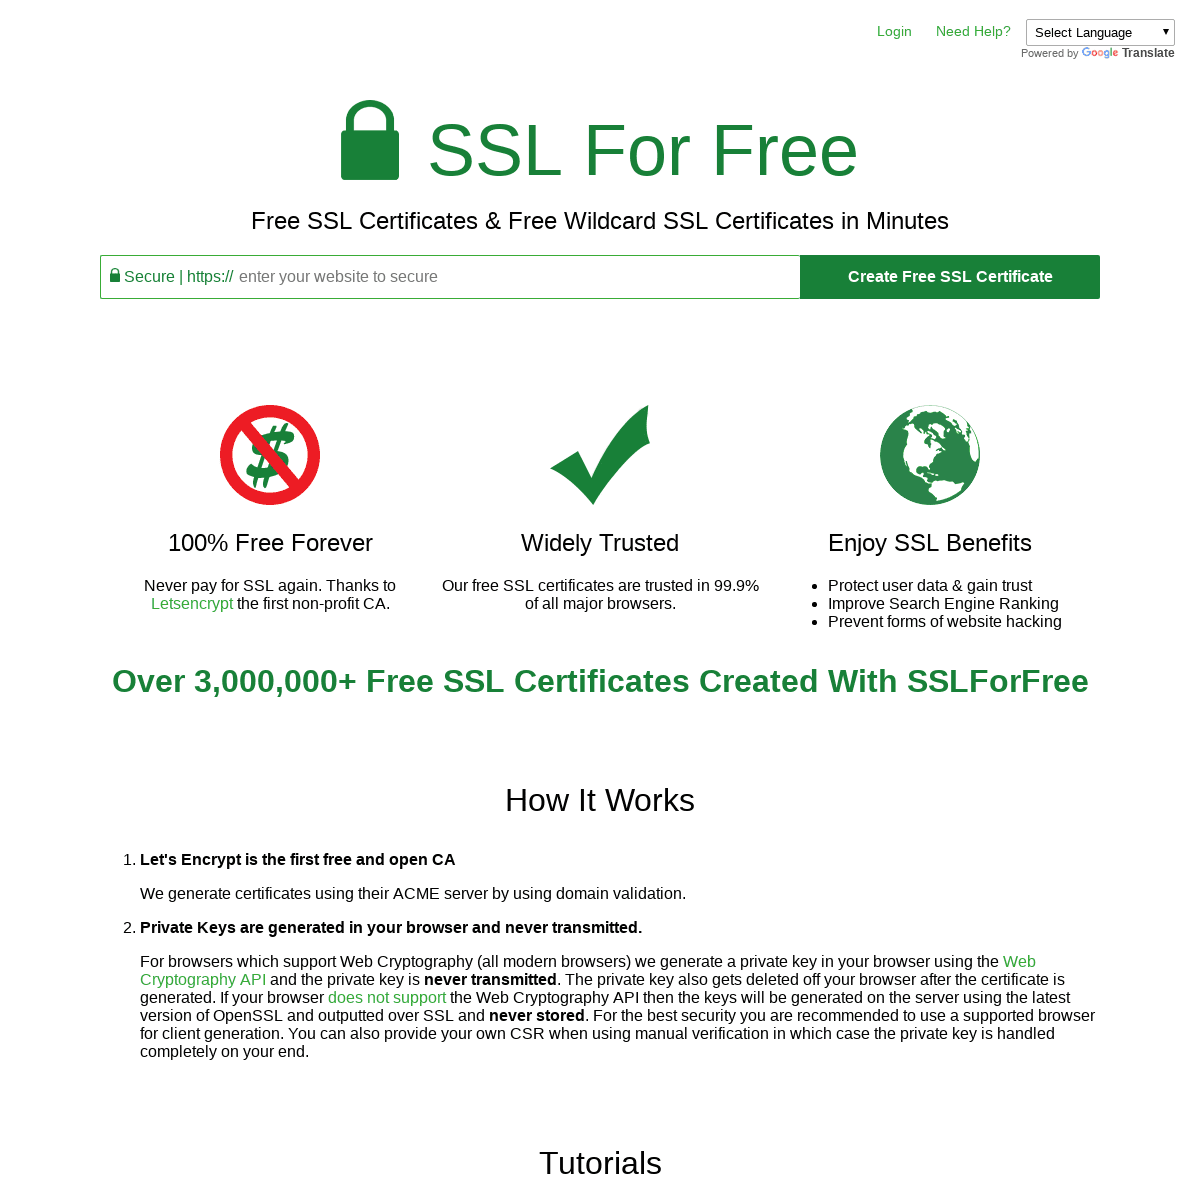 SSL For Free - Free SSL Certificates in Minutes